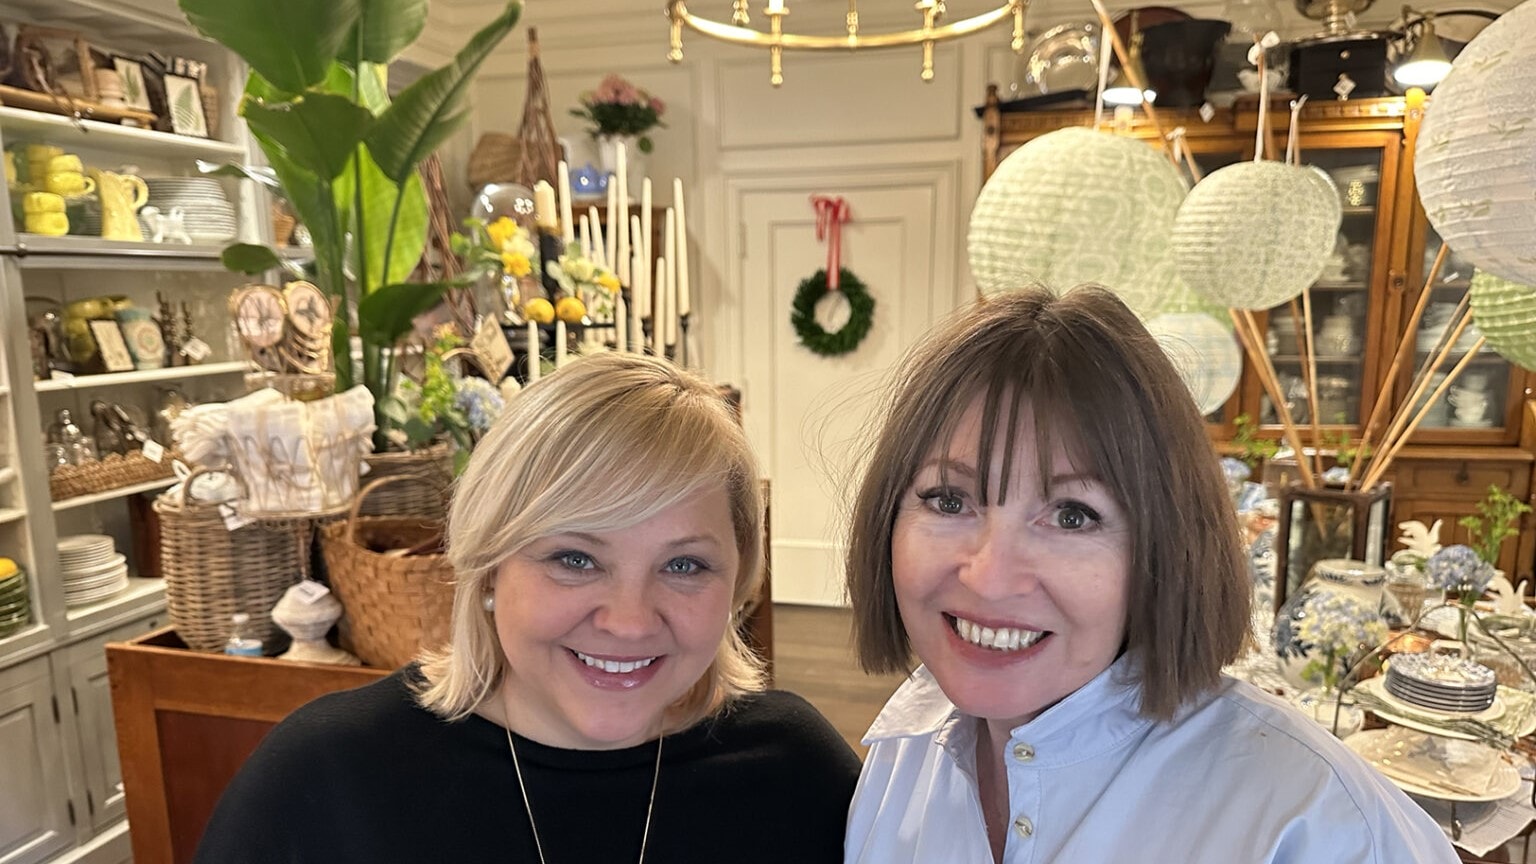 Image - Nell Hill’s Founder Returns With ‘This Little Secret’ Shop